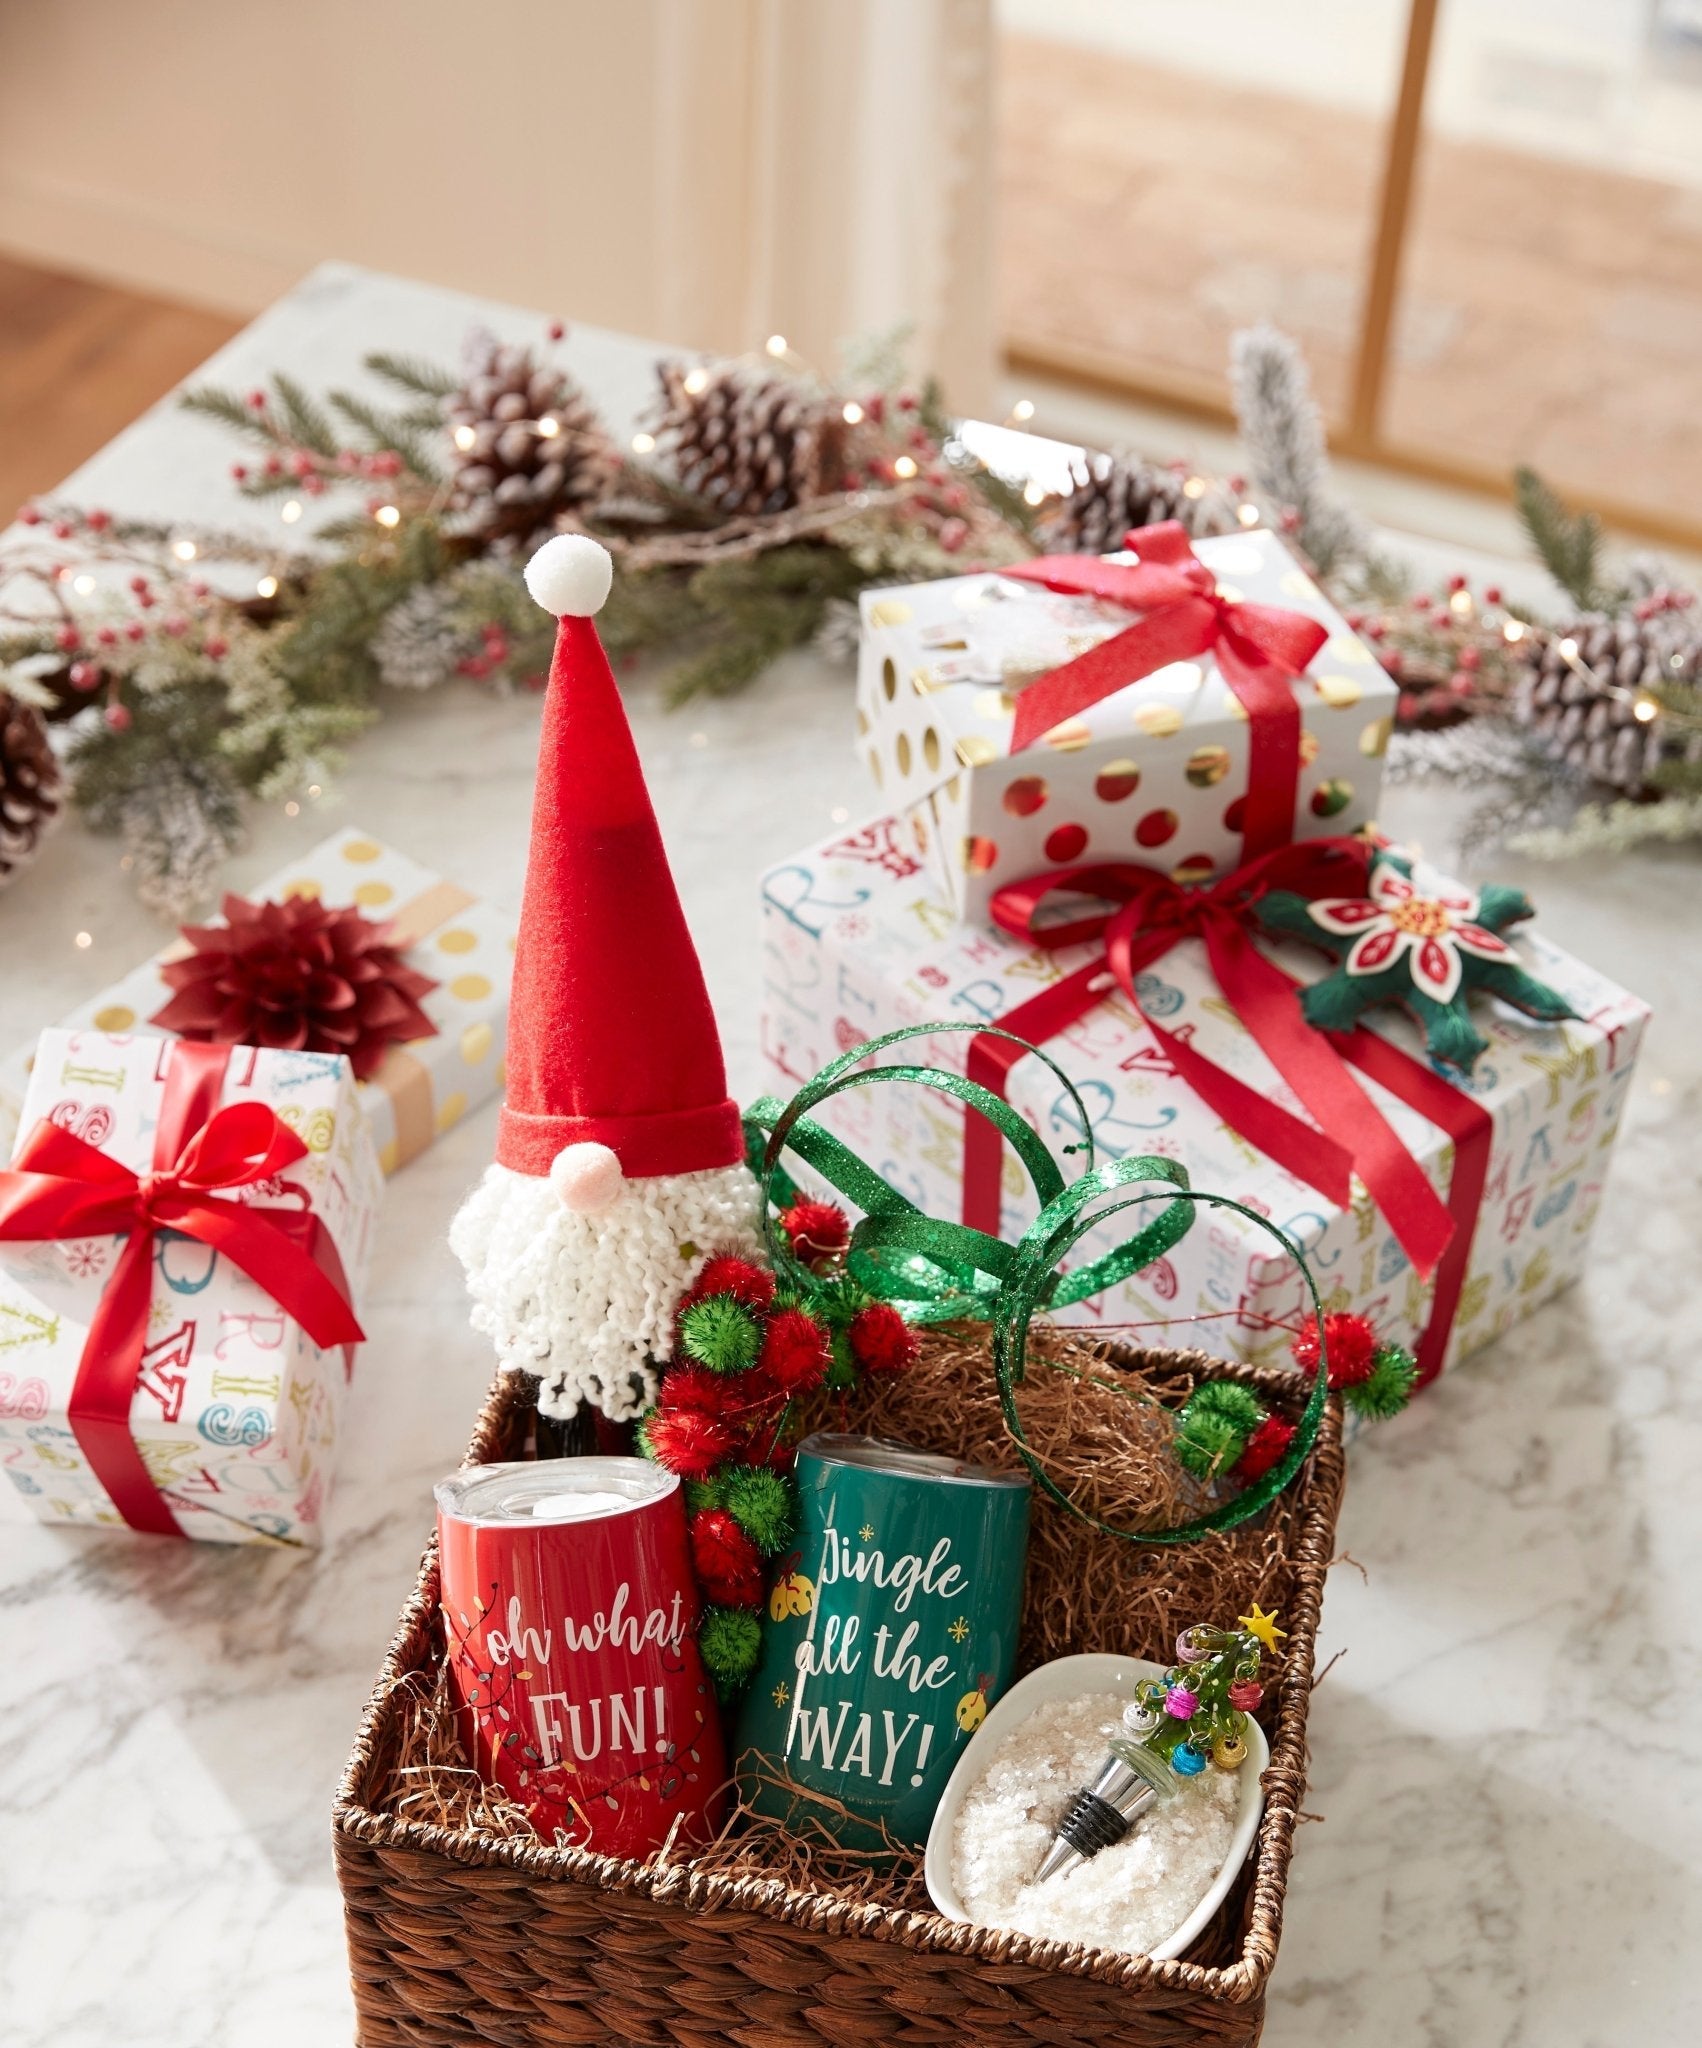 Christmas Day Crafts - Pier 1